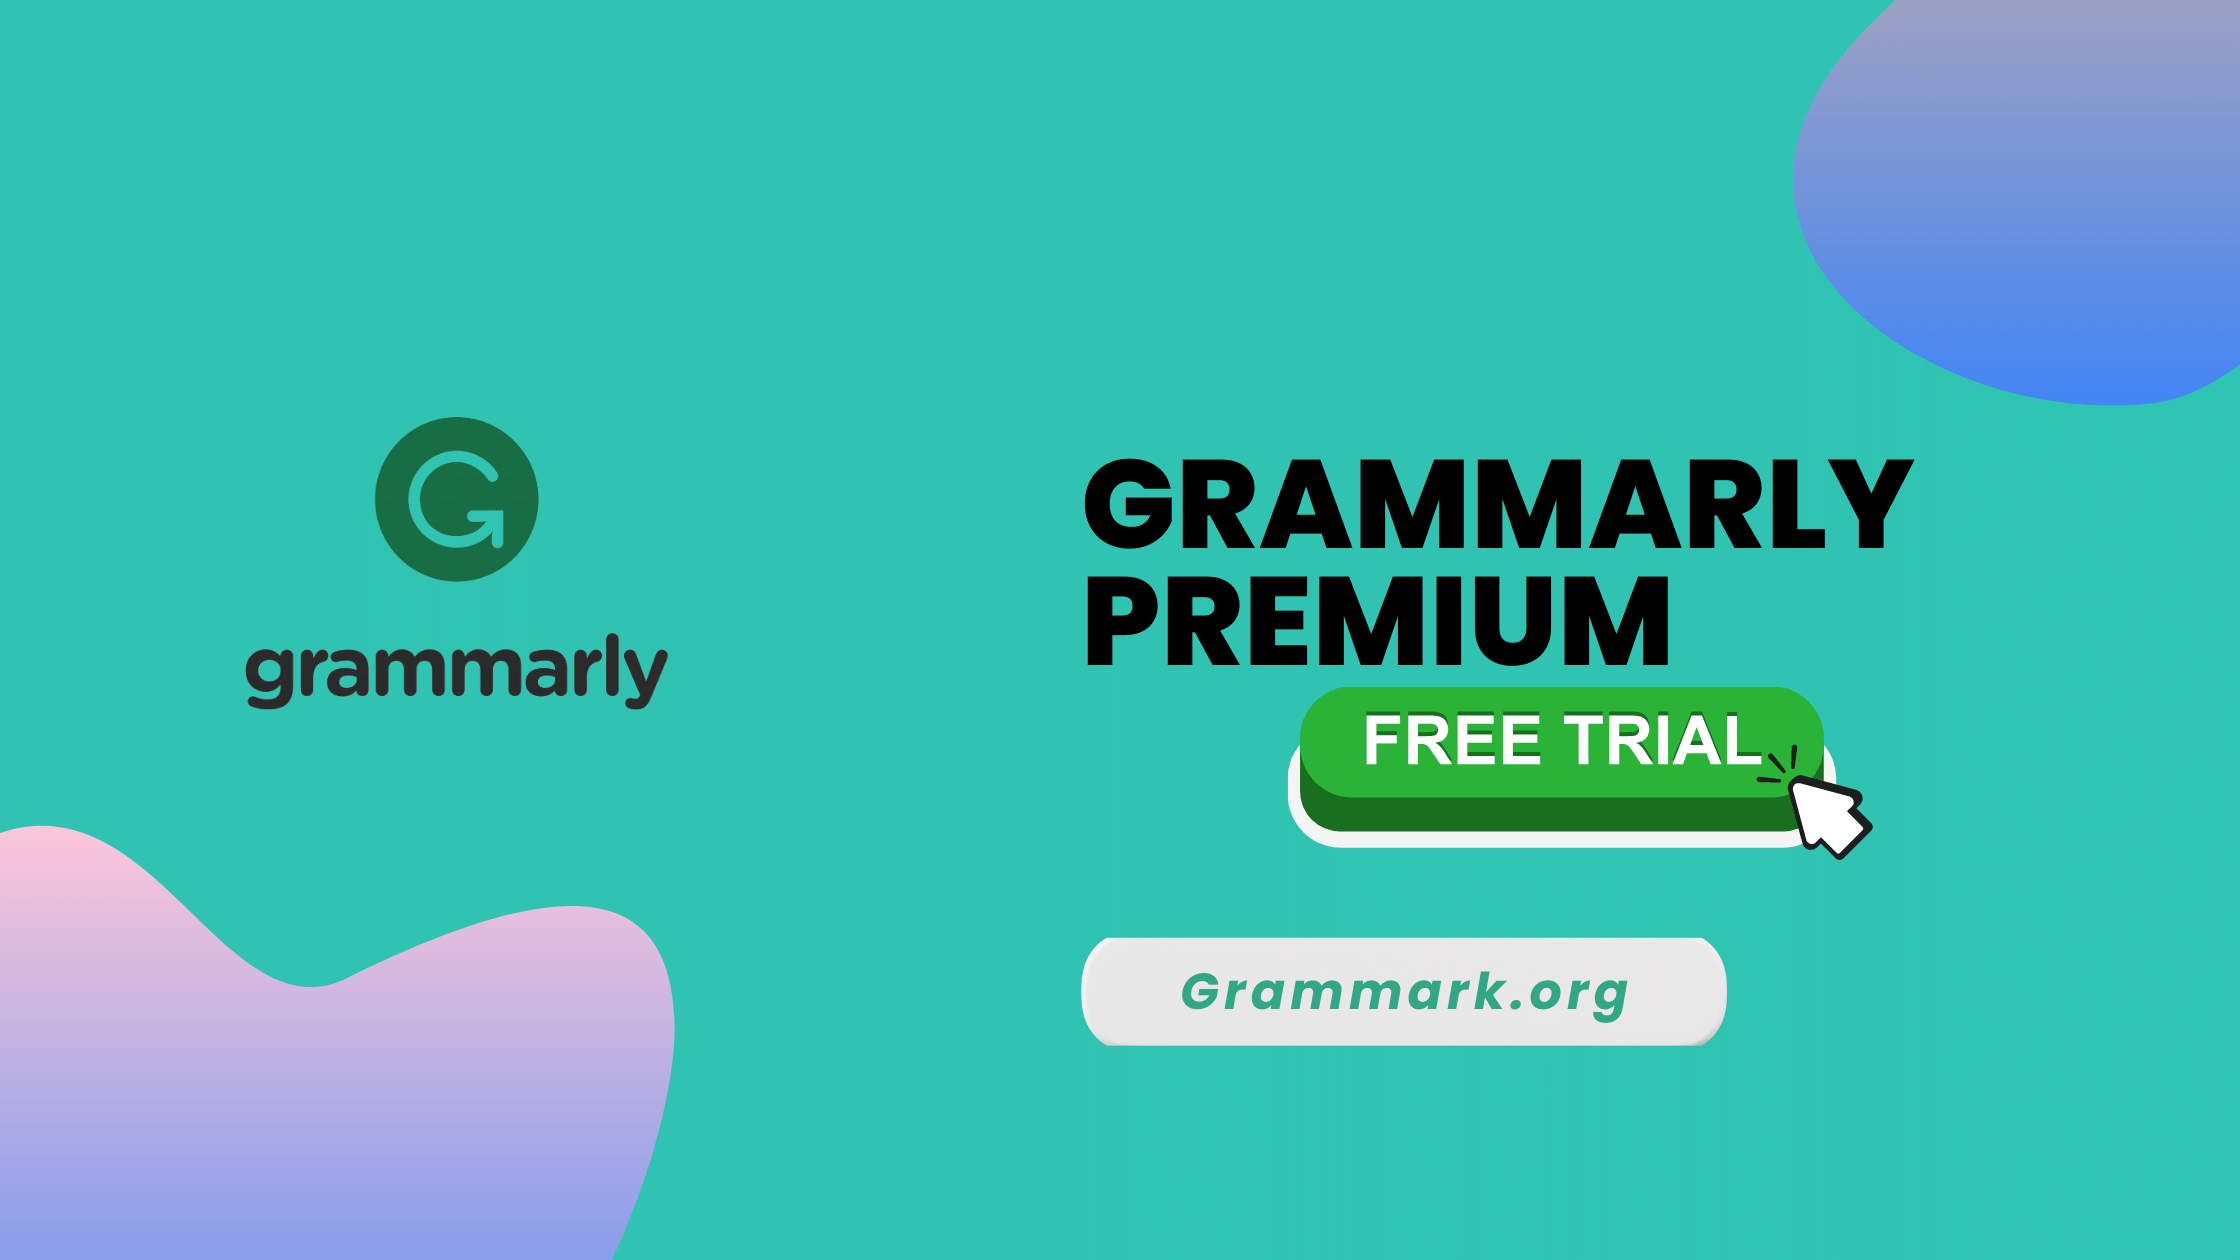 does grammarly offer a free trial